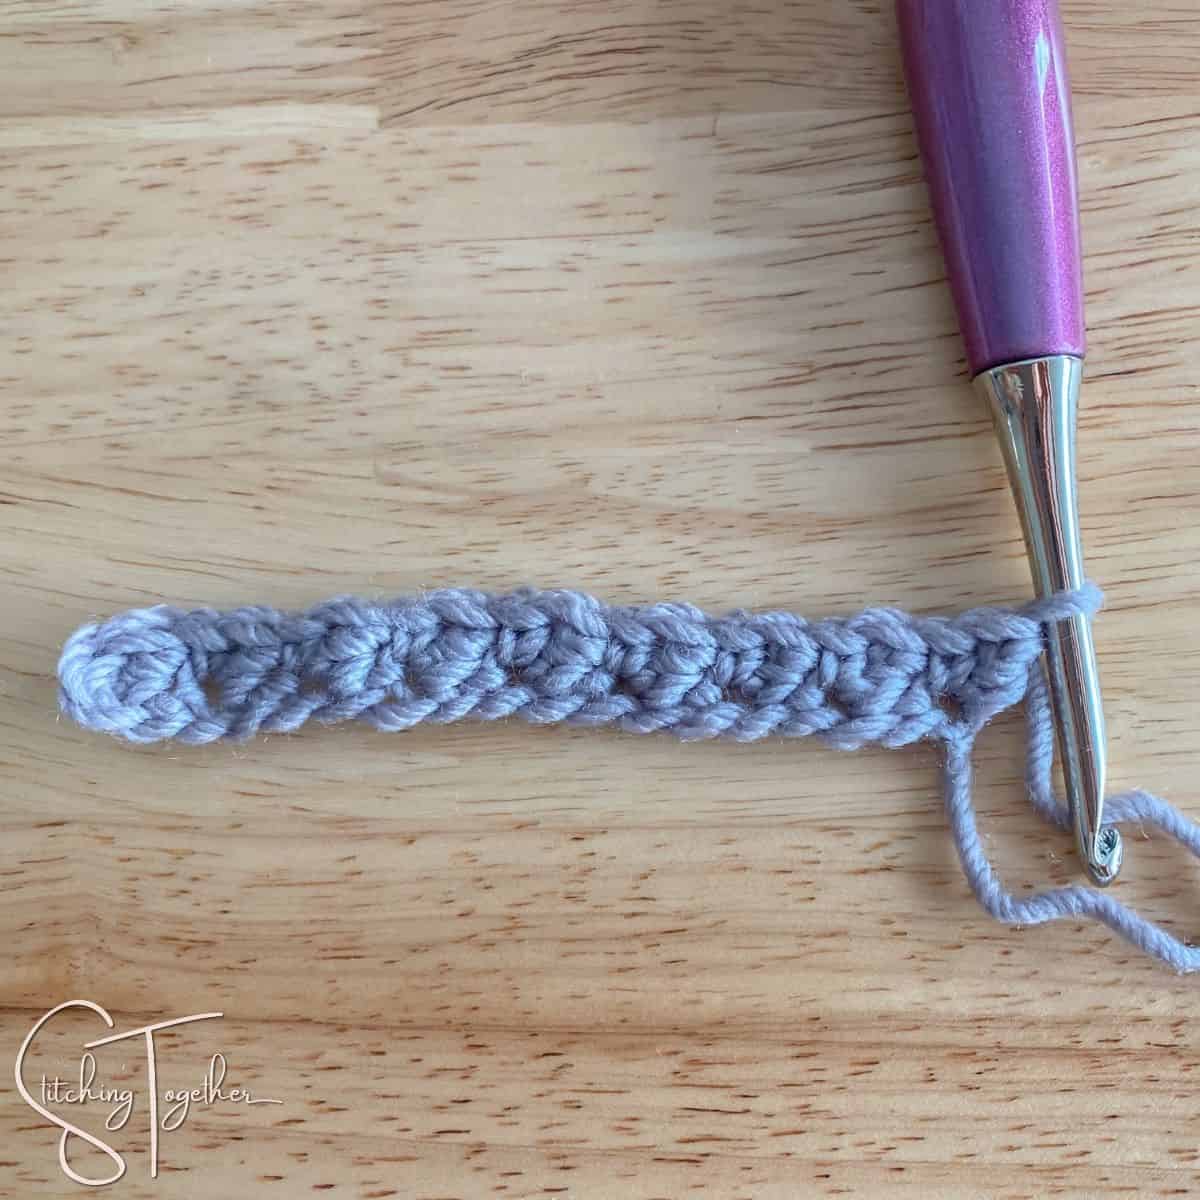 hook and yarn showing row 1 of suzette stitch crochet completed left handed